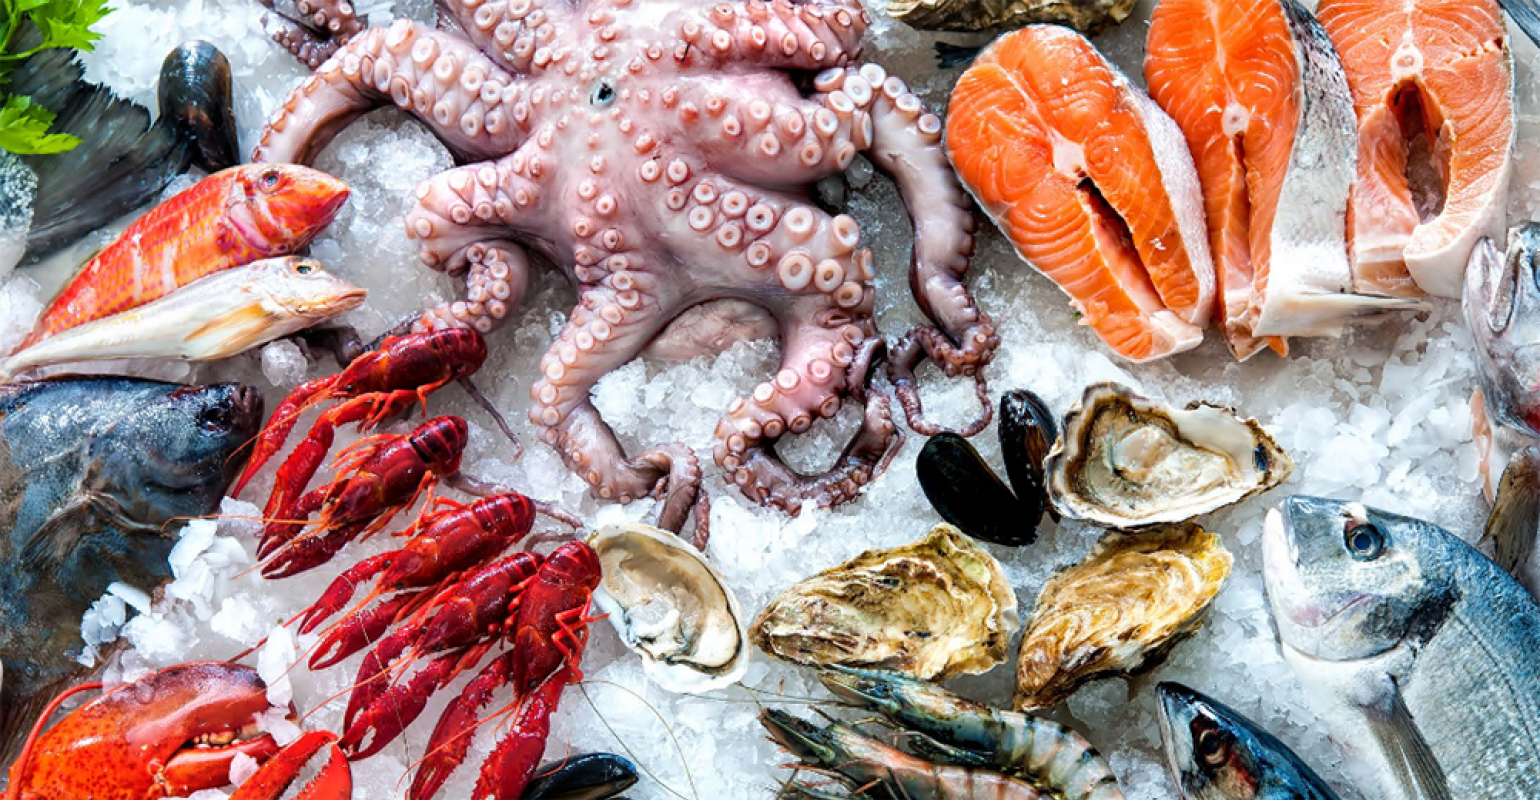 Ozone in Seafood Processing